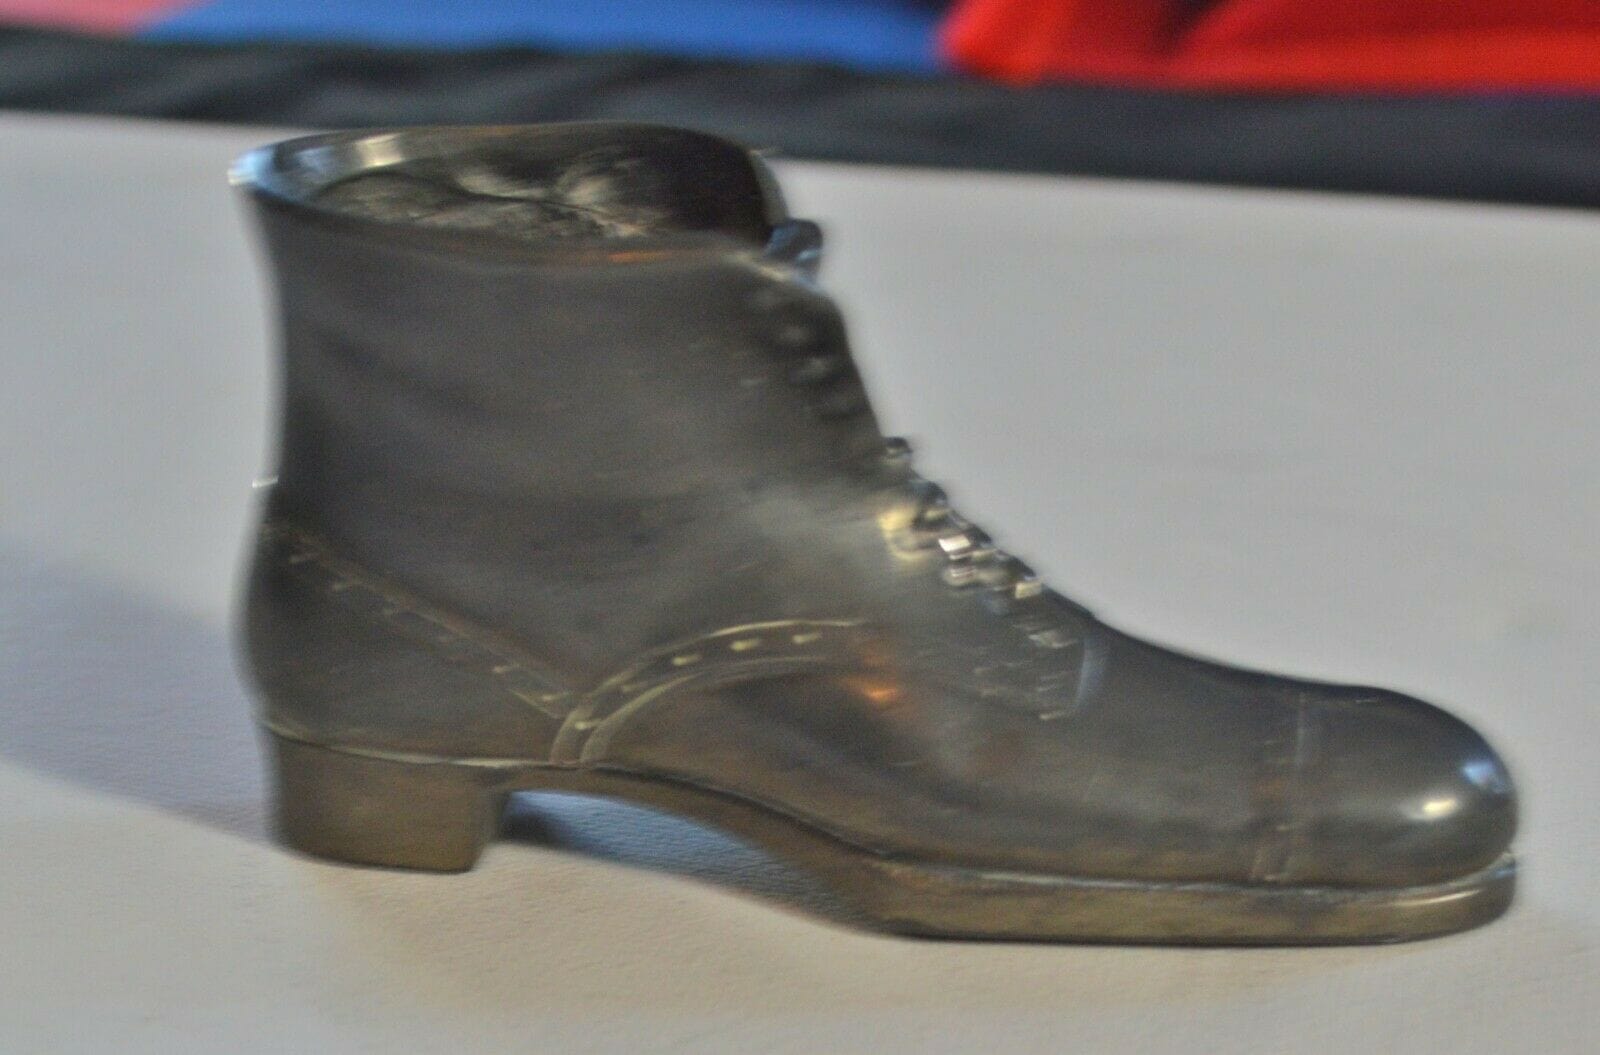 ORNAMENTAL PEWTER SHOES(PREVIOUSLY OWNED) GOOD CONDITION - TMD167207